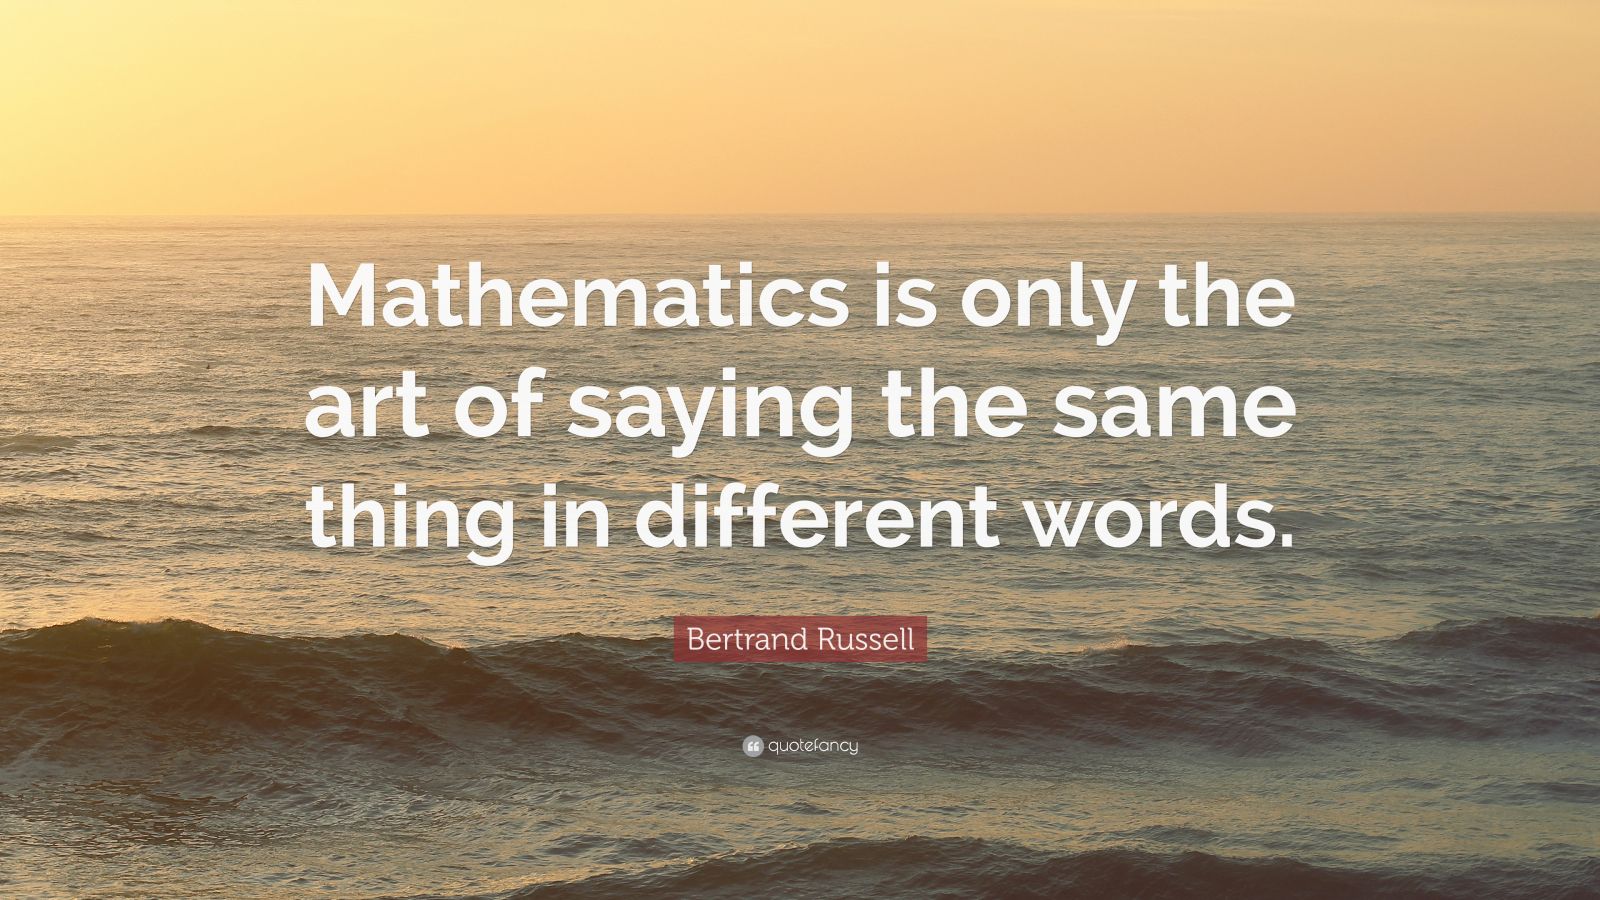 Bertrand Russell Quote Mathematics Is Only The Art Of Saying The Same Thing In Different Words